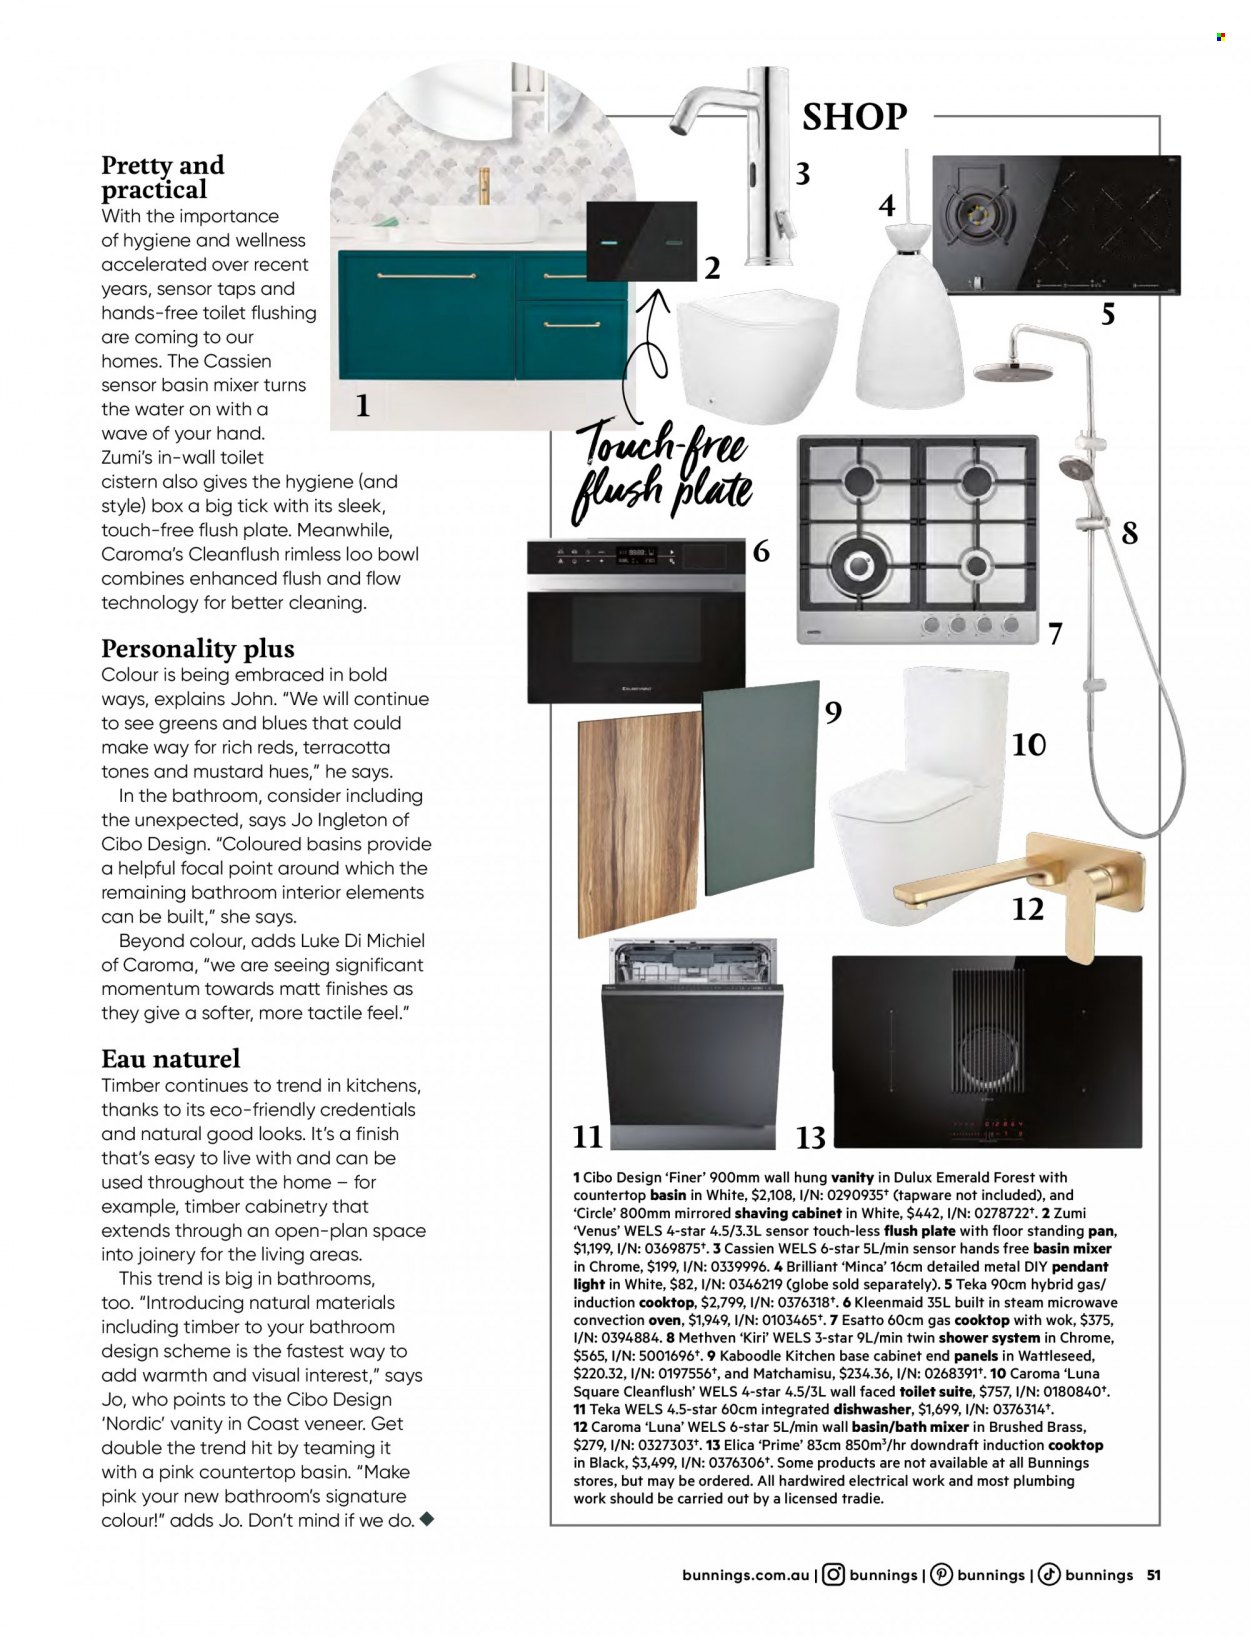 thumbnail - Bunnings Warehouse mailer - 01.03.2023 - 31.03.2023 - Sales products - bath mixer, basin mixer, cabinet, vanity, mustard, plate, pan, wok, oven, convection oven, microwave, dishwasher, cooktop, induction cooktop, Dulux. Page 51.